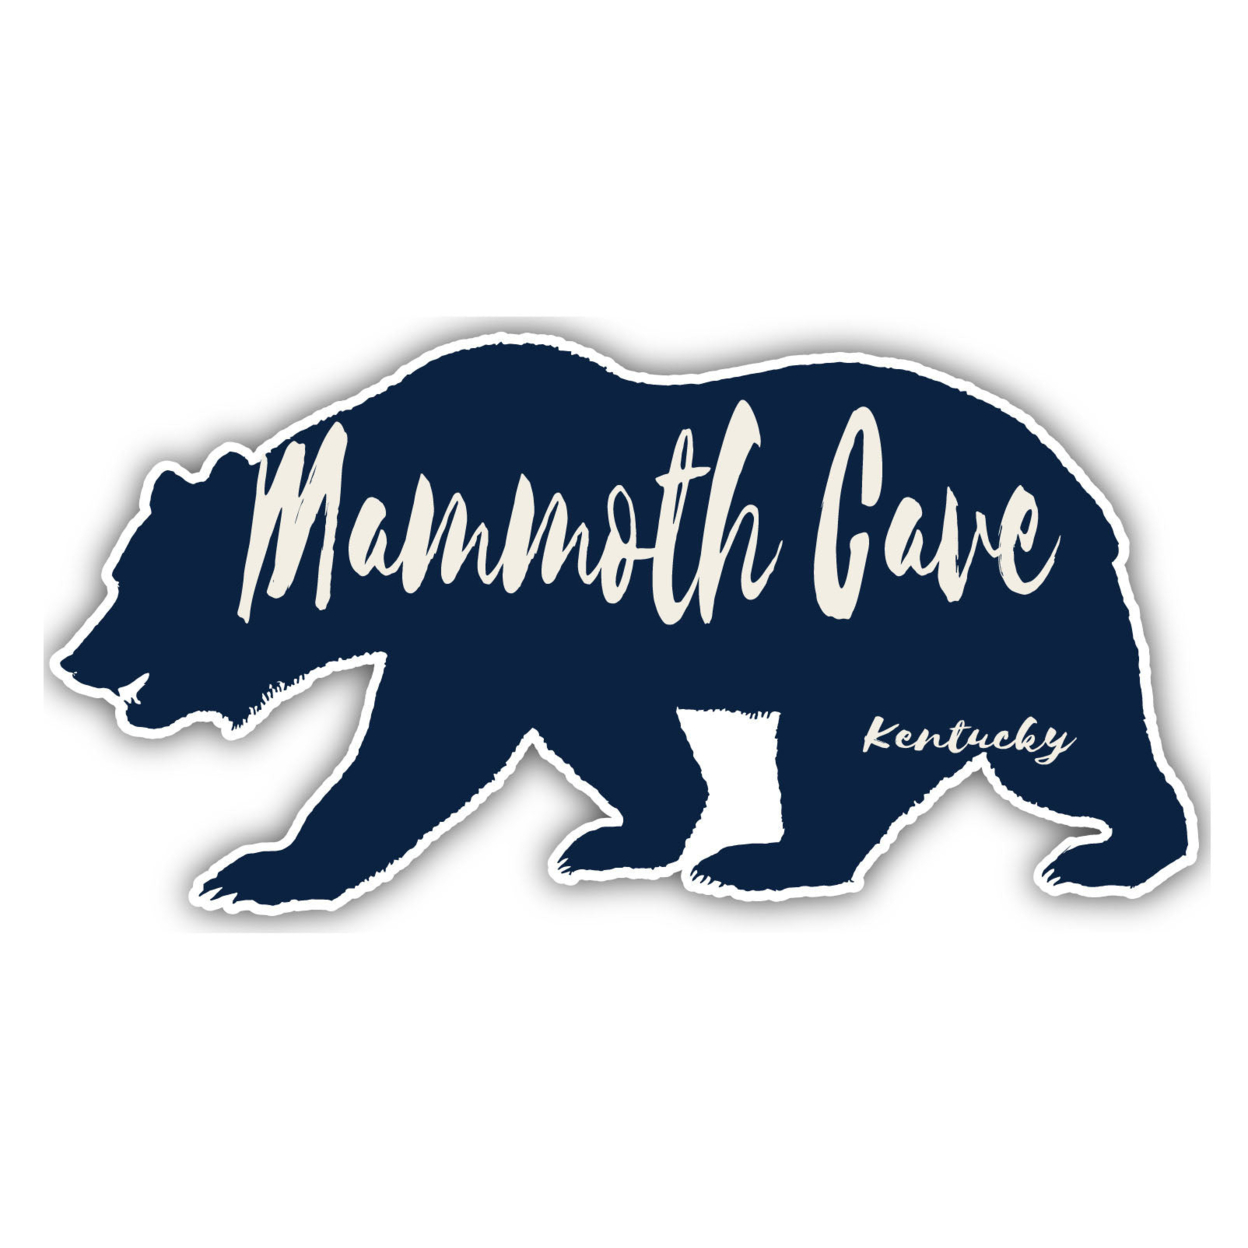 Mammoth Cave Kentucky Souvenir Decorative Stickers (Choose Theme And Size) - 2-Inch, Bear